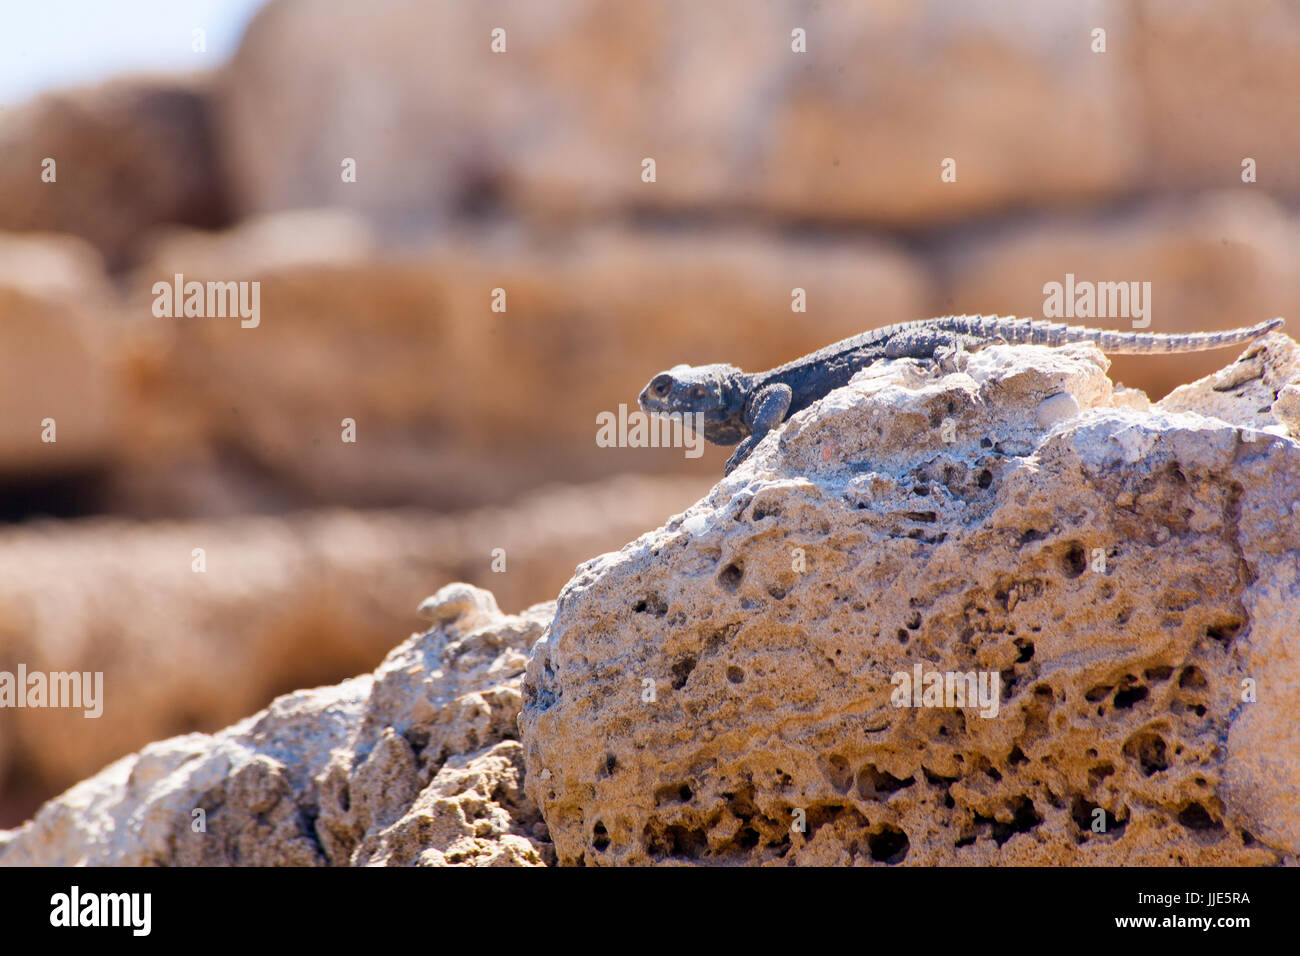 Desert lizard Side close up portrait on hot dry stones in archaeological site roman ruins in israel Stock Photo